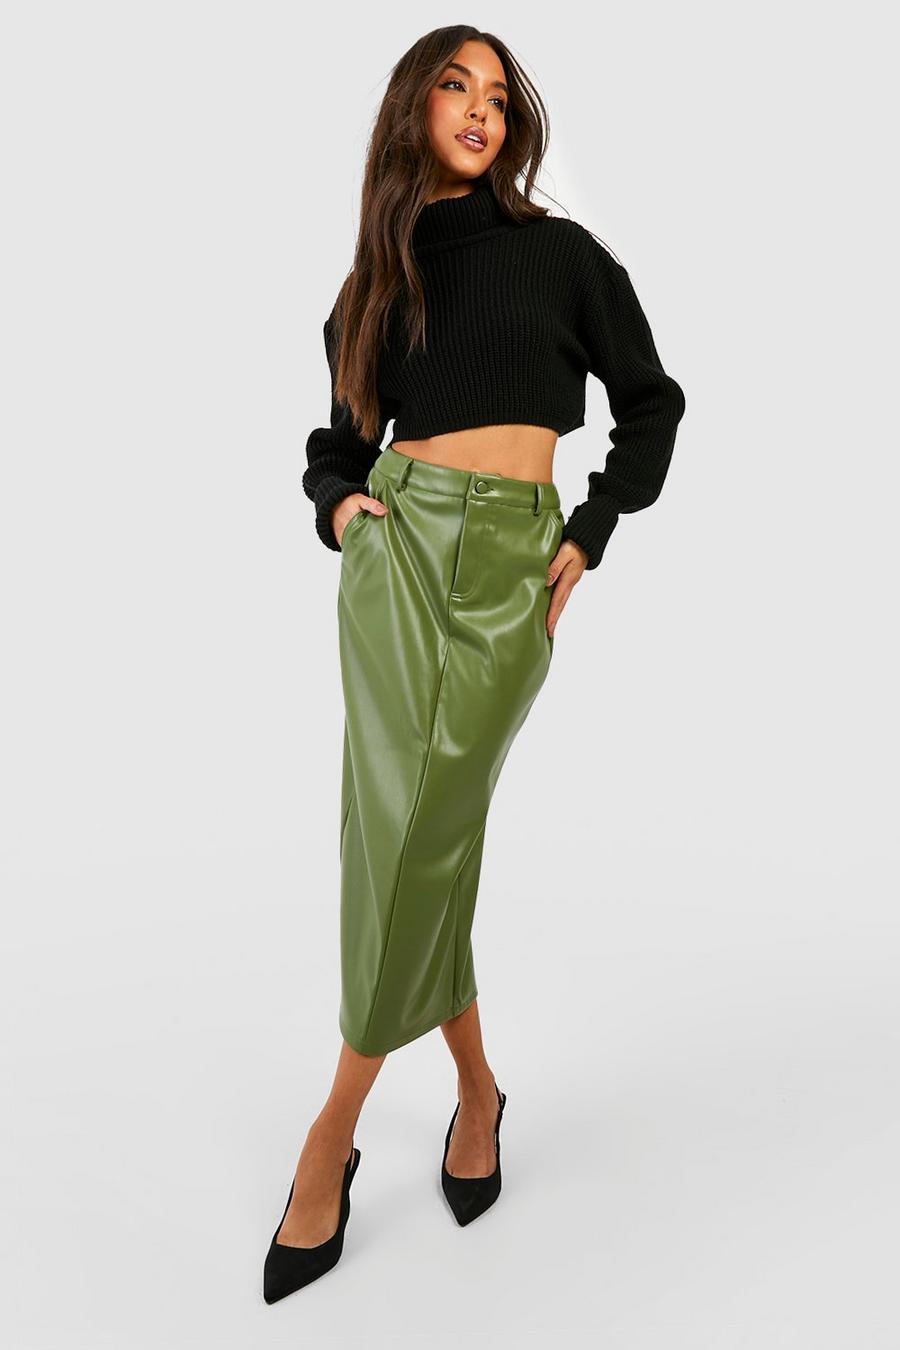 Khaki Leather Look High Waisted Midaxi Skirt image number 1